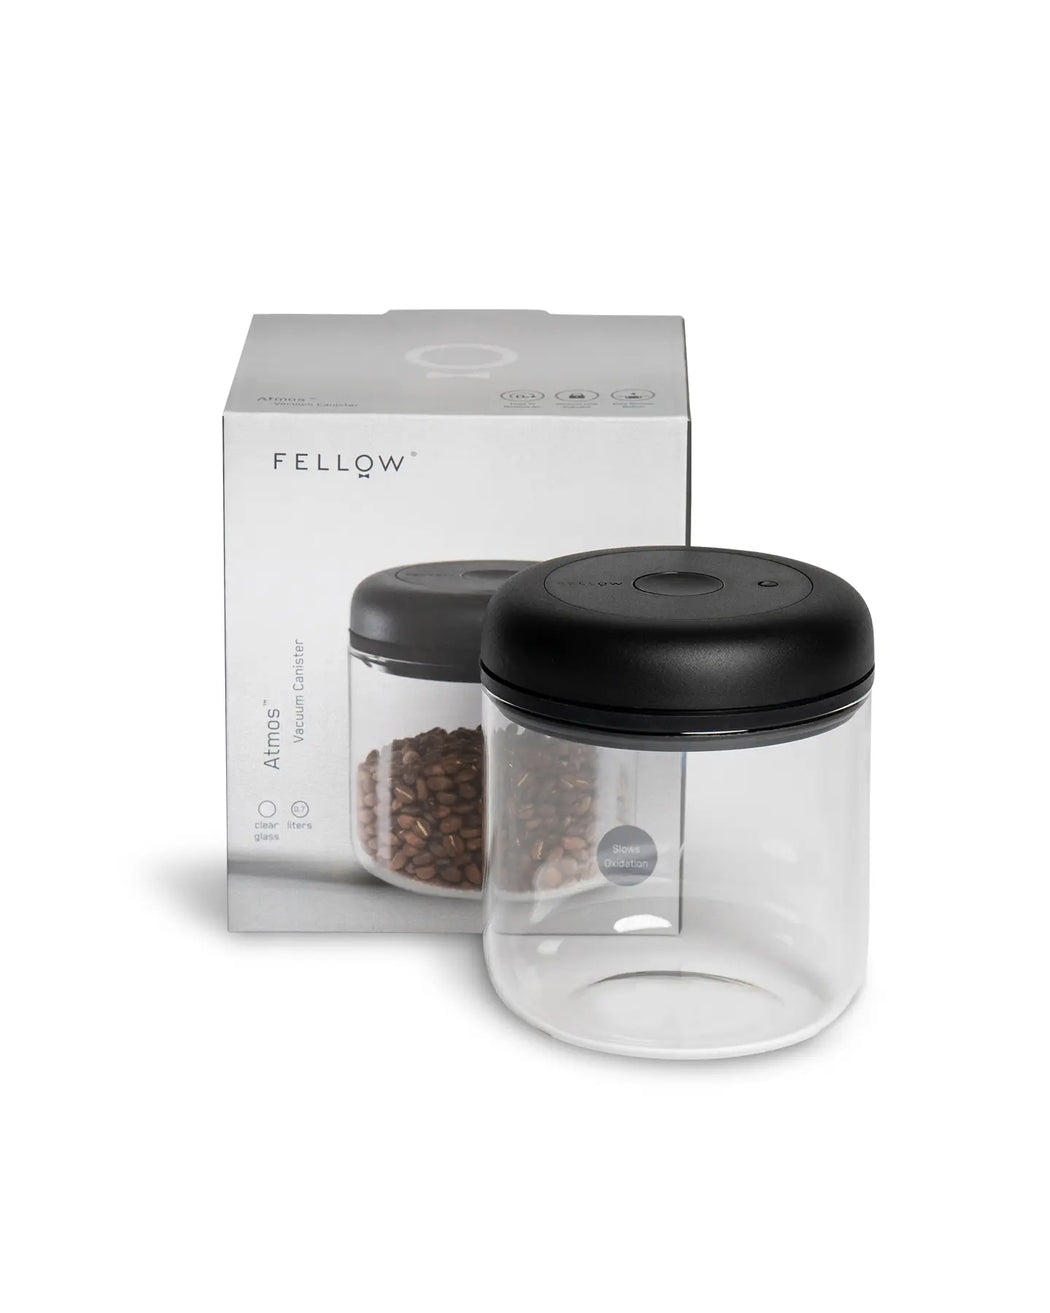 The Atmos Canister from Felow with the packaging